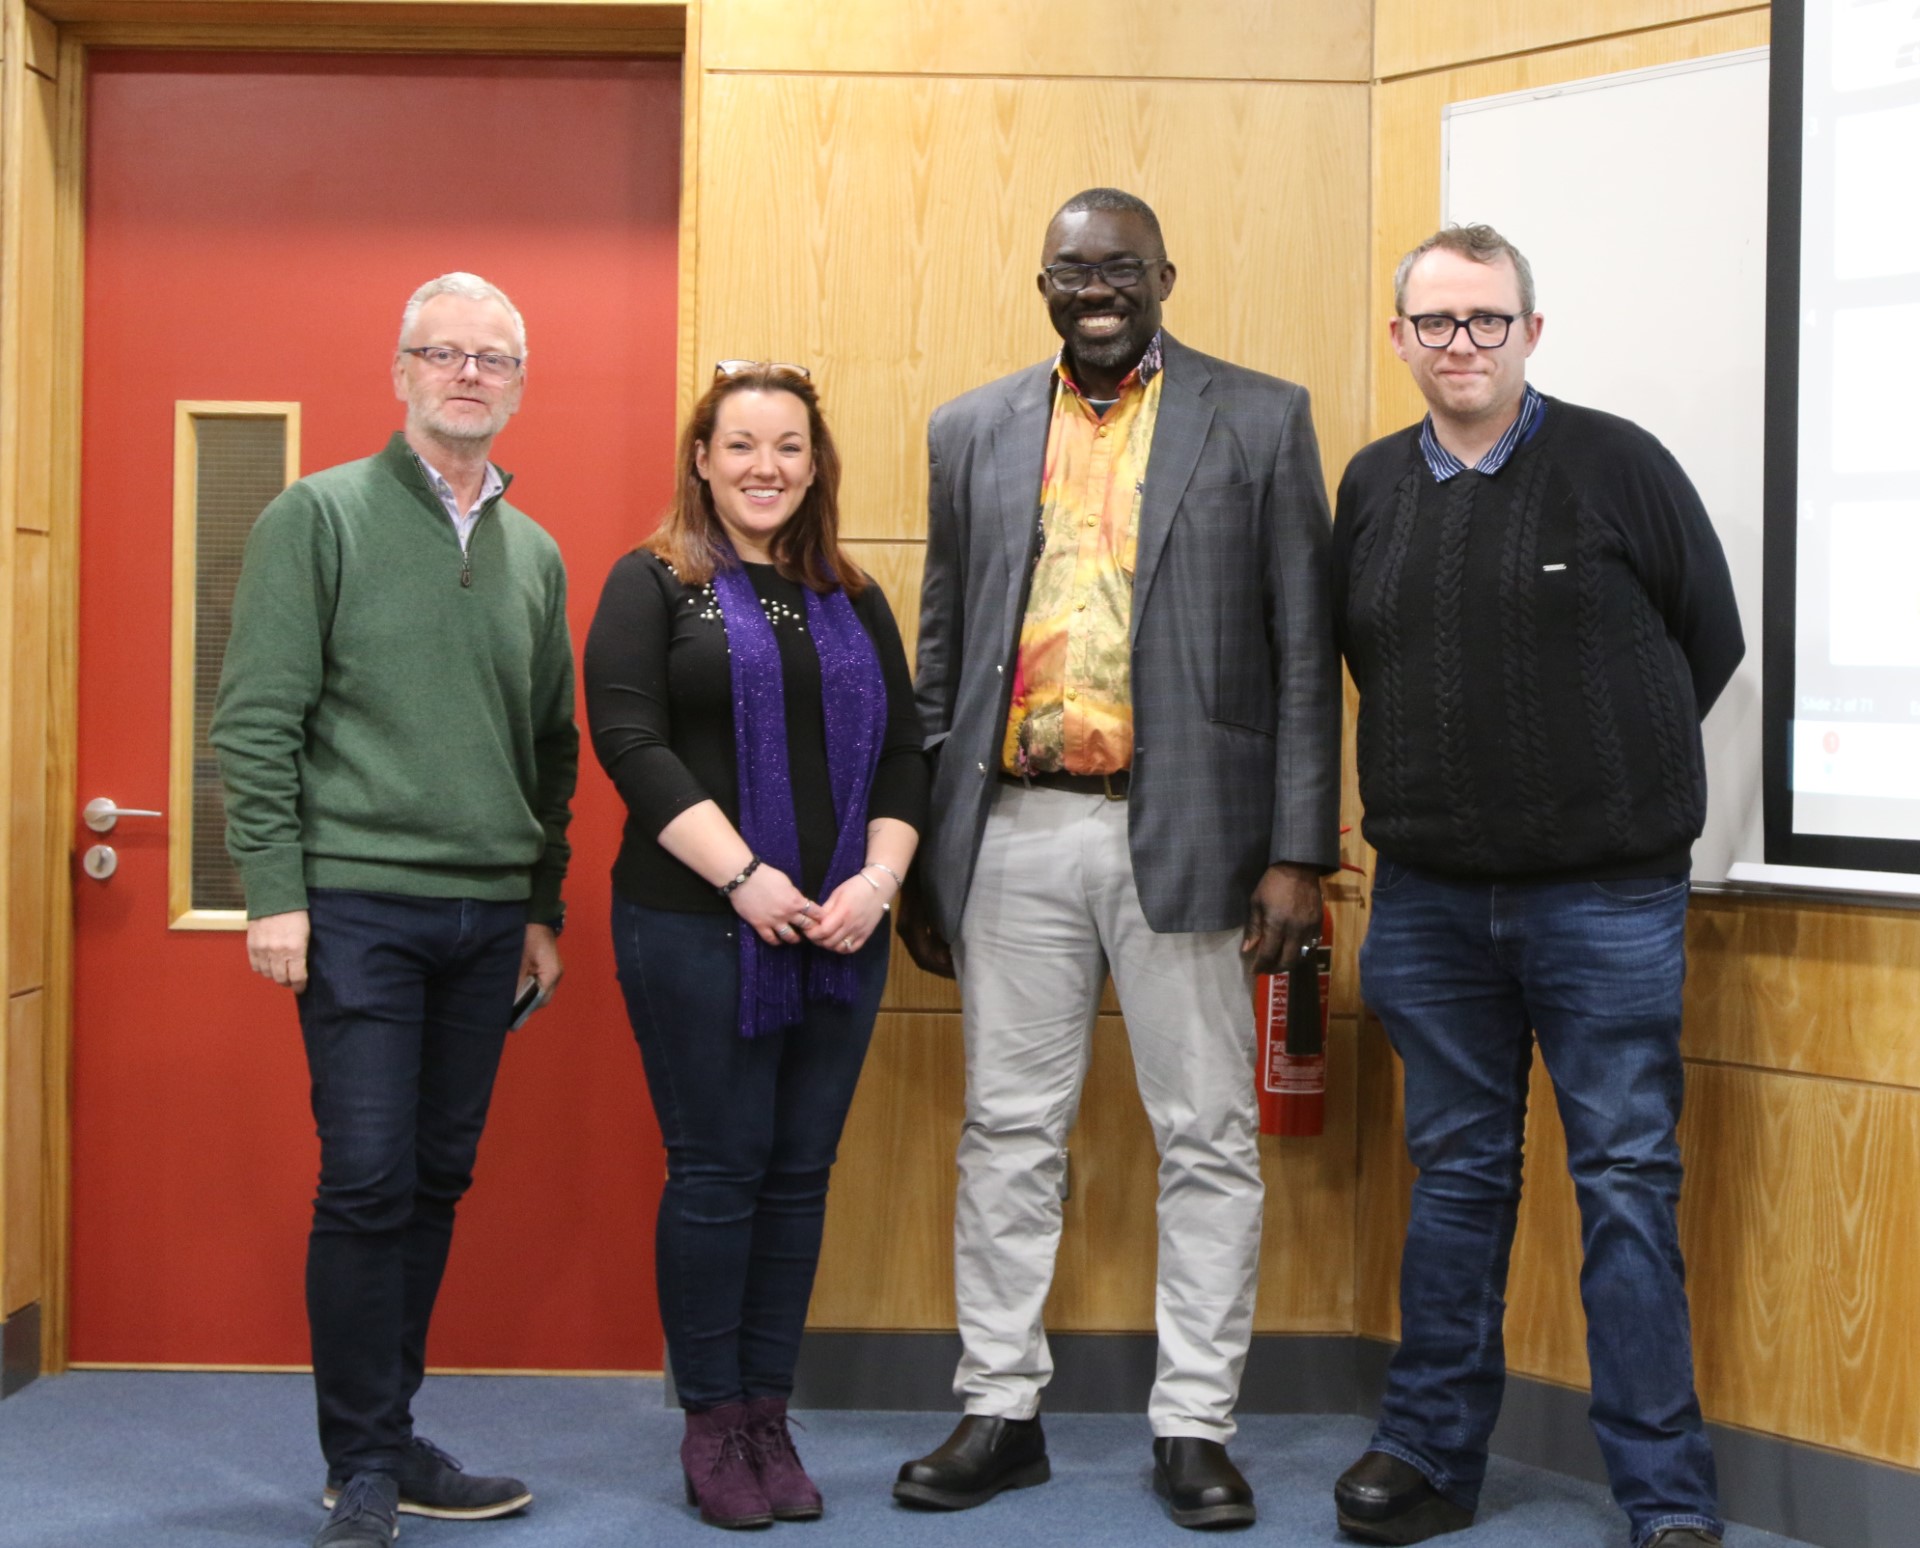 Dr Colins Imoh with colleagues from Peace Studies at Atlantic Technological University.